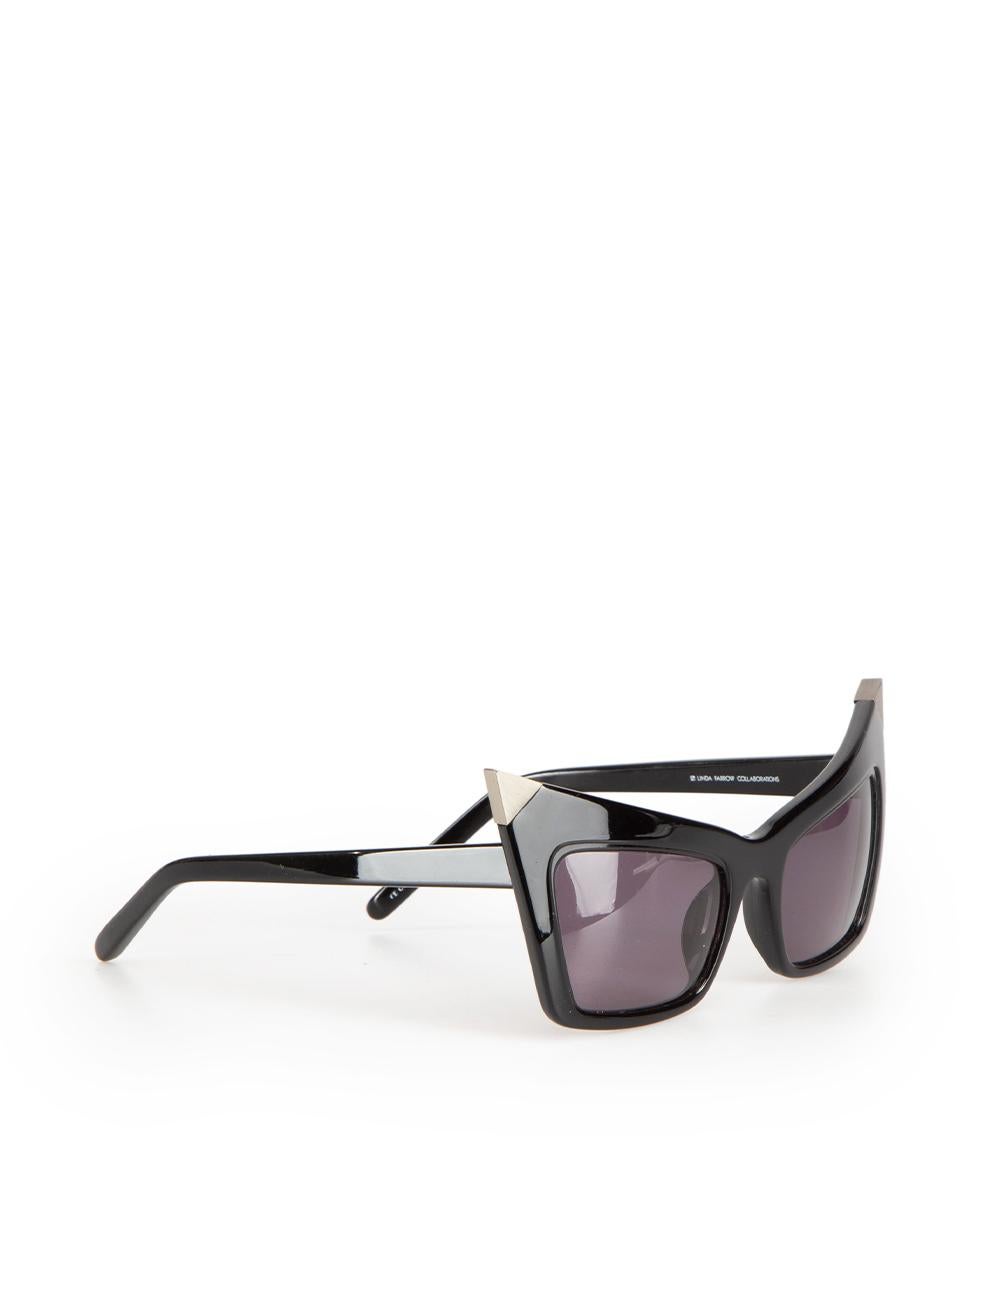 CONDITION is Good. Minor wear to sunglasses is evident. Light wear to the frame with light scratches on this used Alexander Wang x Linda Farrow designer resale item.

Details
Black
Plastic
Sunglasses
Cat-eye
Metal tip detail
Black tinted lens

Made